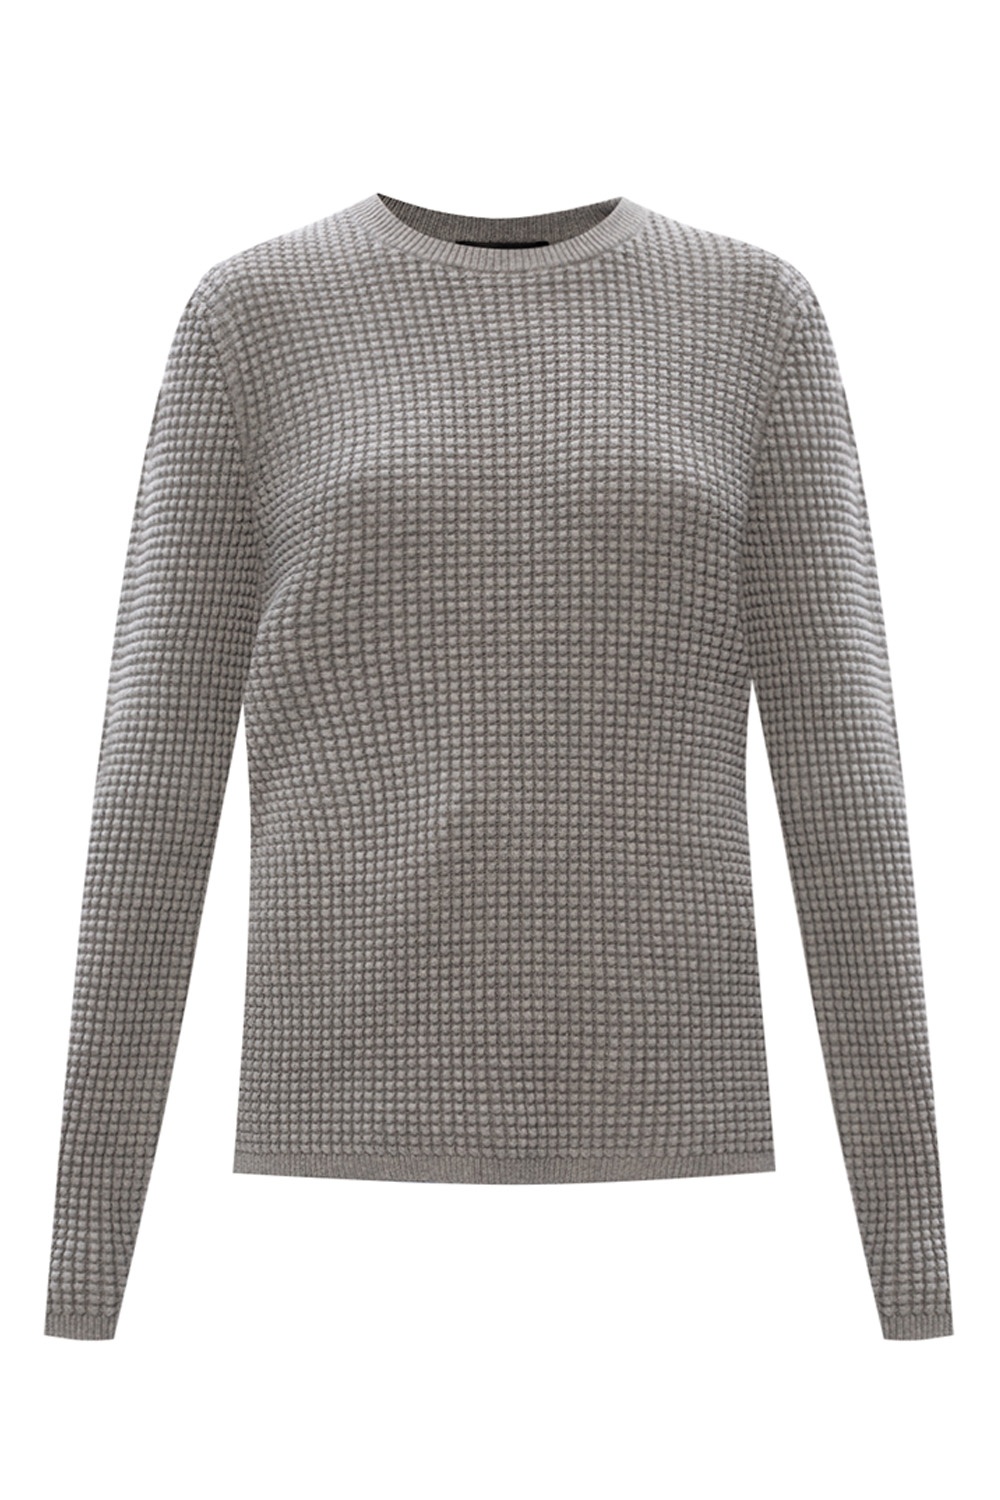 Theory Knitted sweater | Women's Clothing | IetpShops